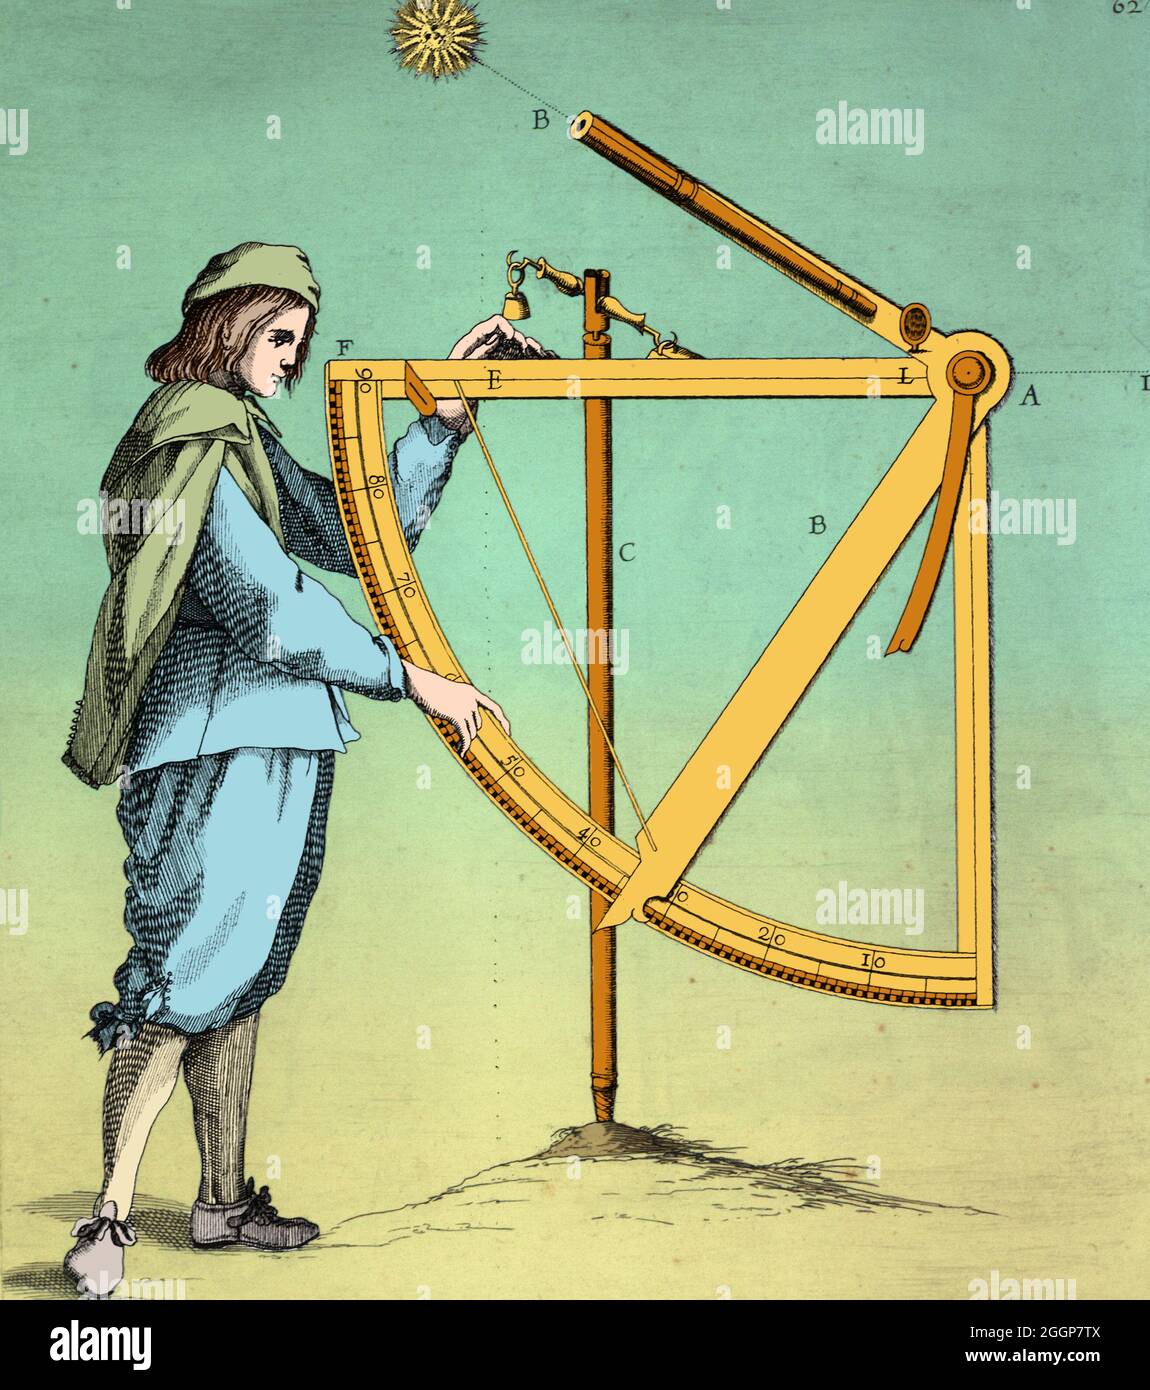 Sketch depicting a method of calculating the sun's elevation. Stock Photo